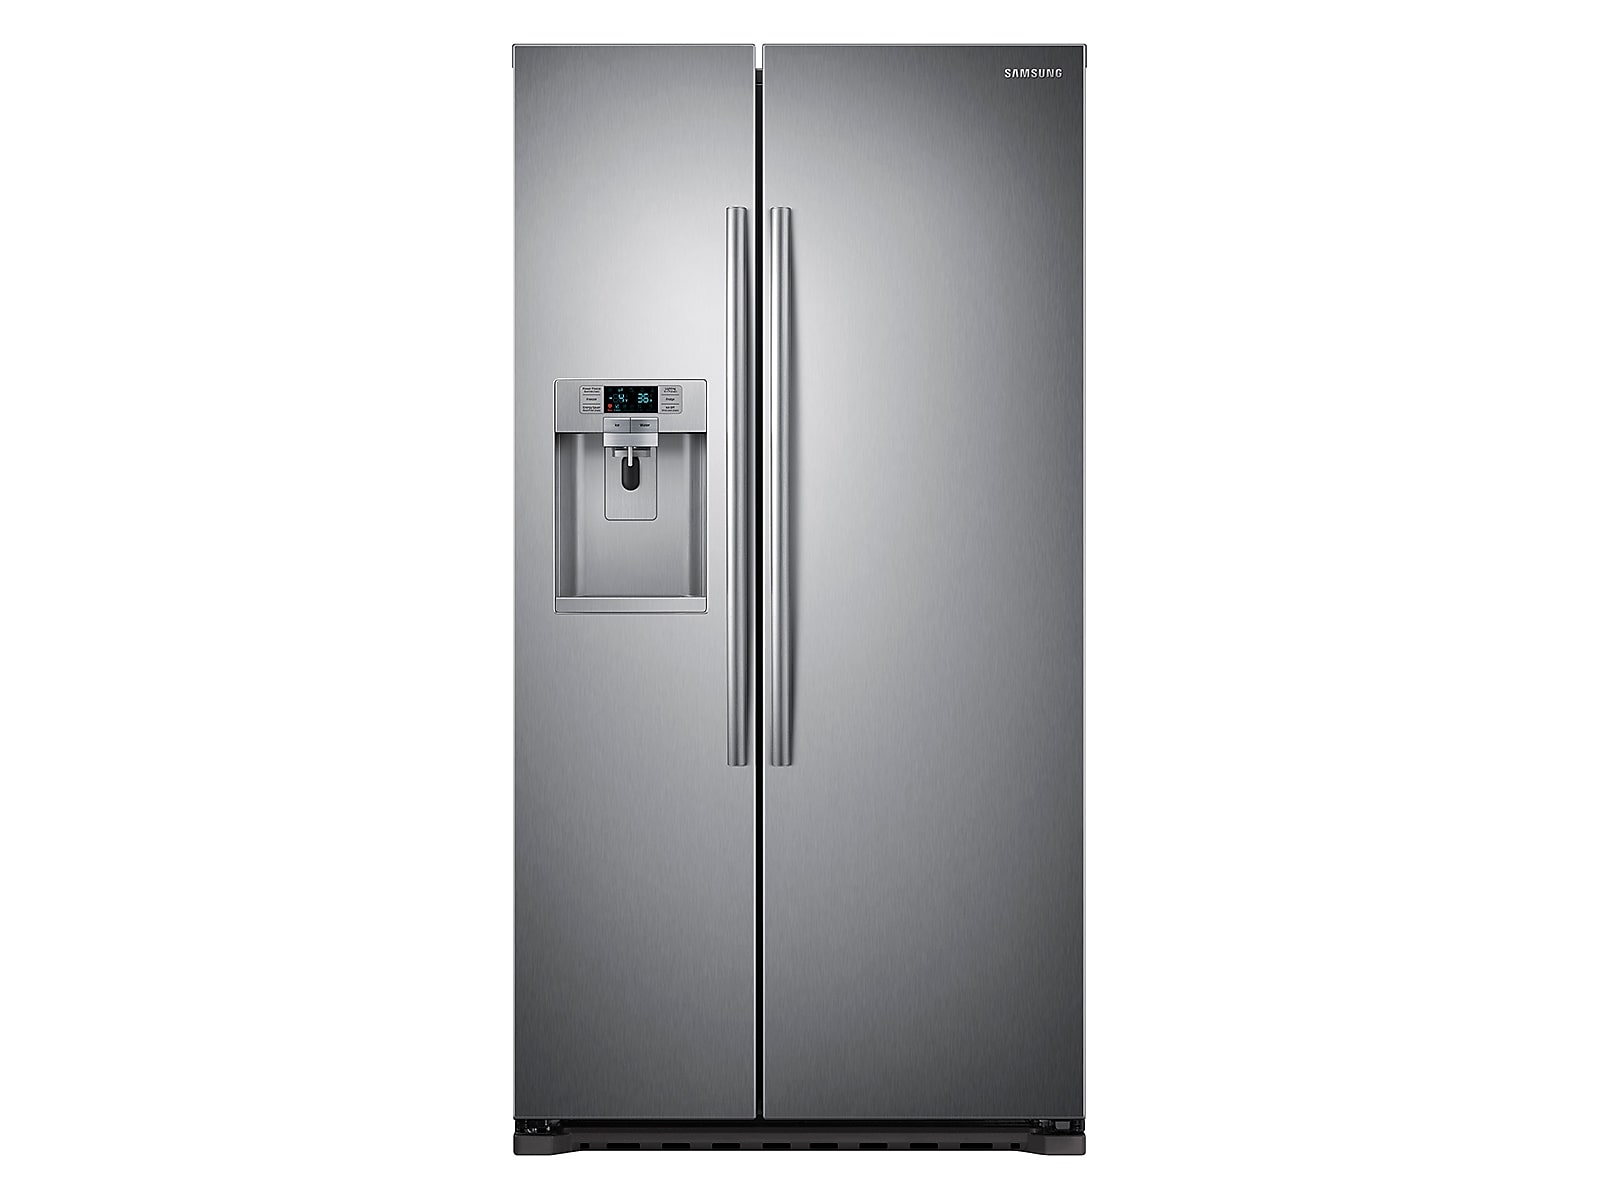 Samsung 22 cu. ft. Counter Depth Side-by-Side Refrigerator in Stainless Steel(RS22HDHPNSR/AA) photo